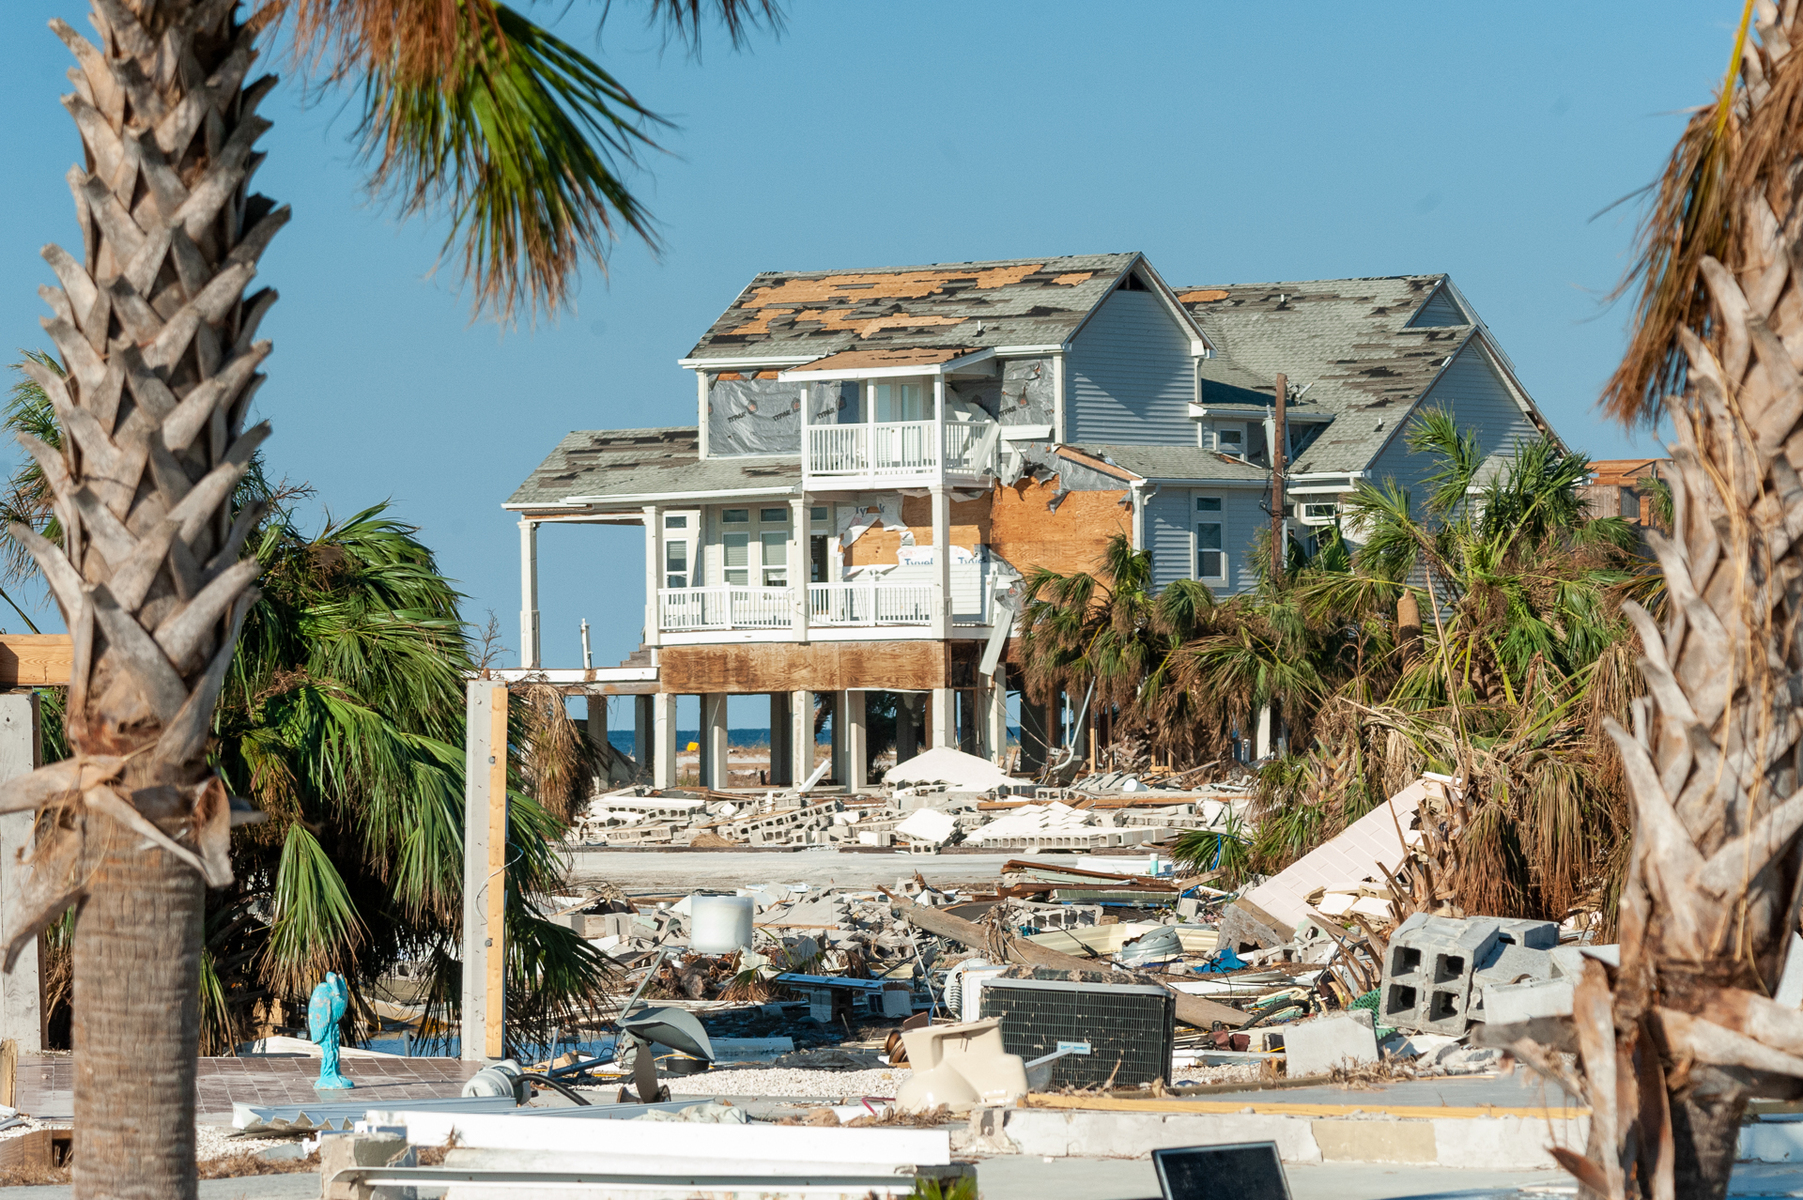 October 18, 2018 - Mexico Beach, FL - An elevated house that   came through Hurricane Michael almost unscathed. The strongest storm on record to ever make landfall in Northwest Florida, and the fourth most powerful to ever hit the continental United States.